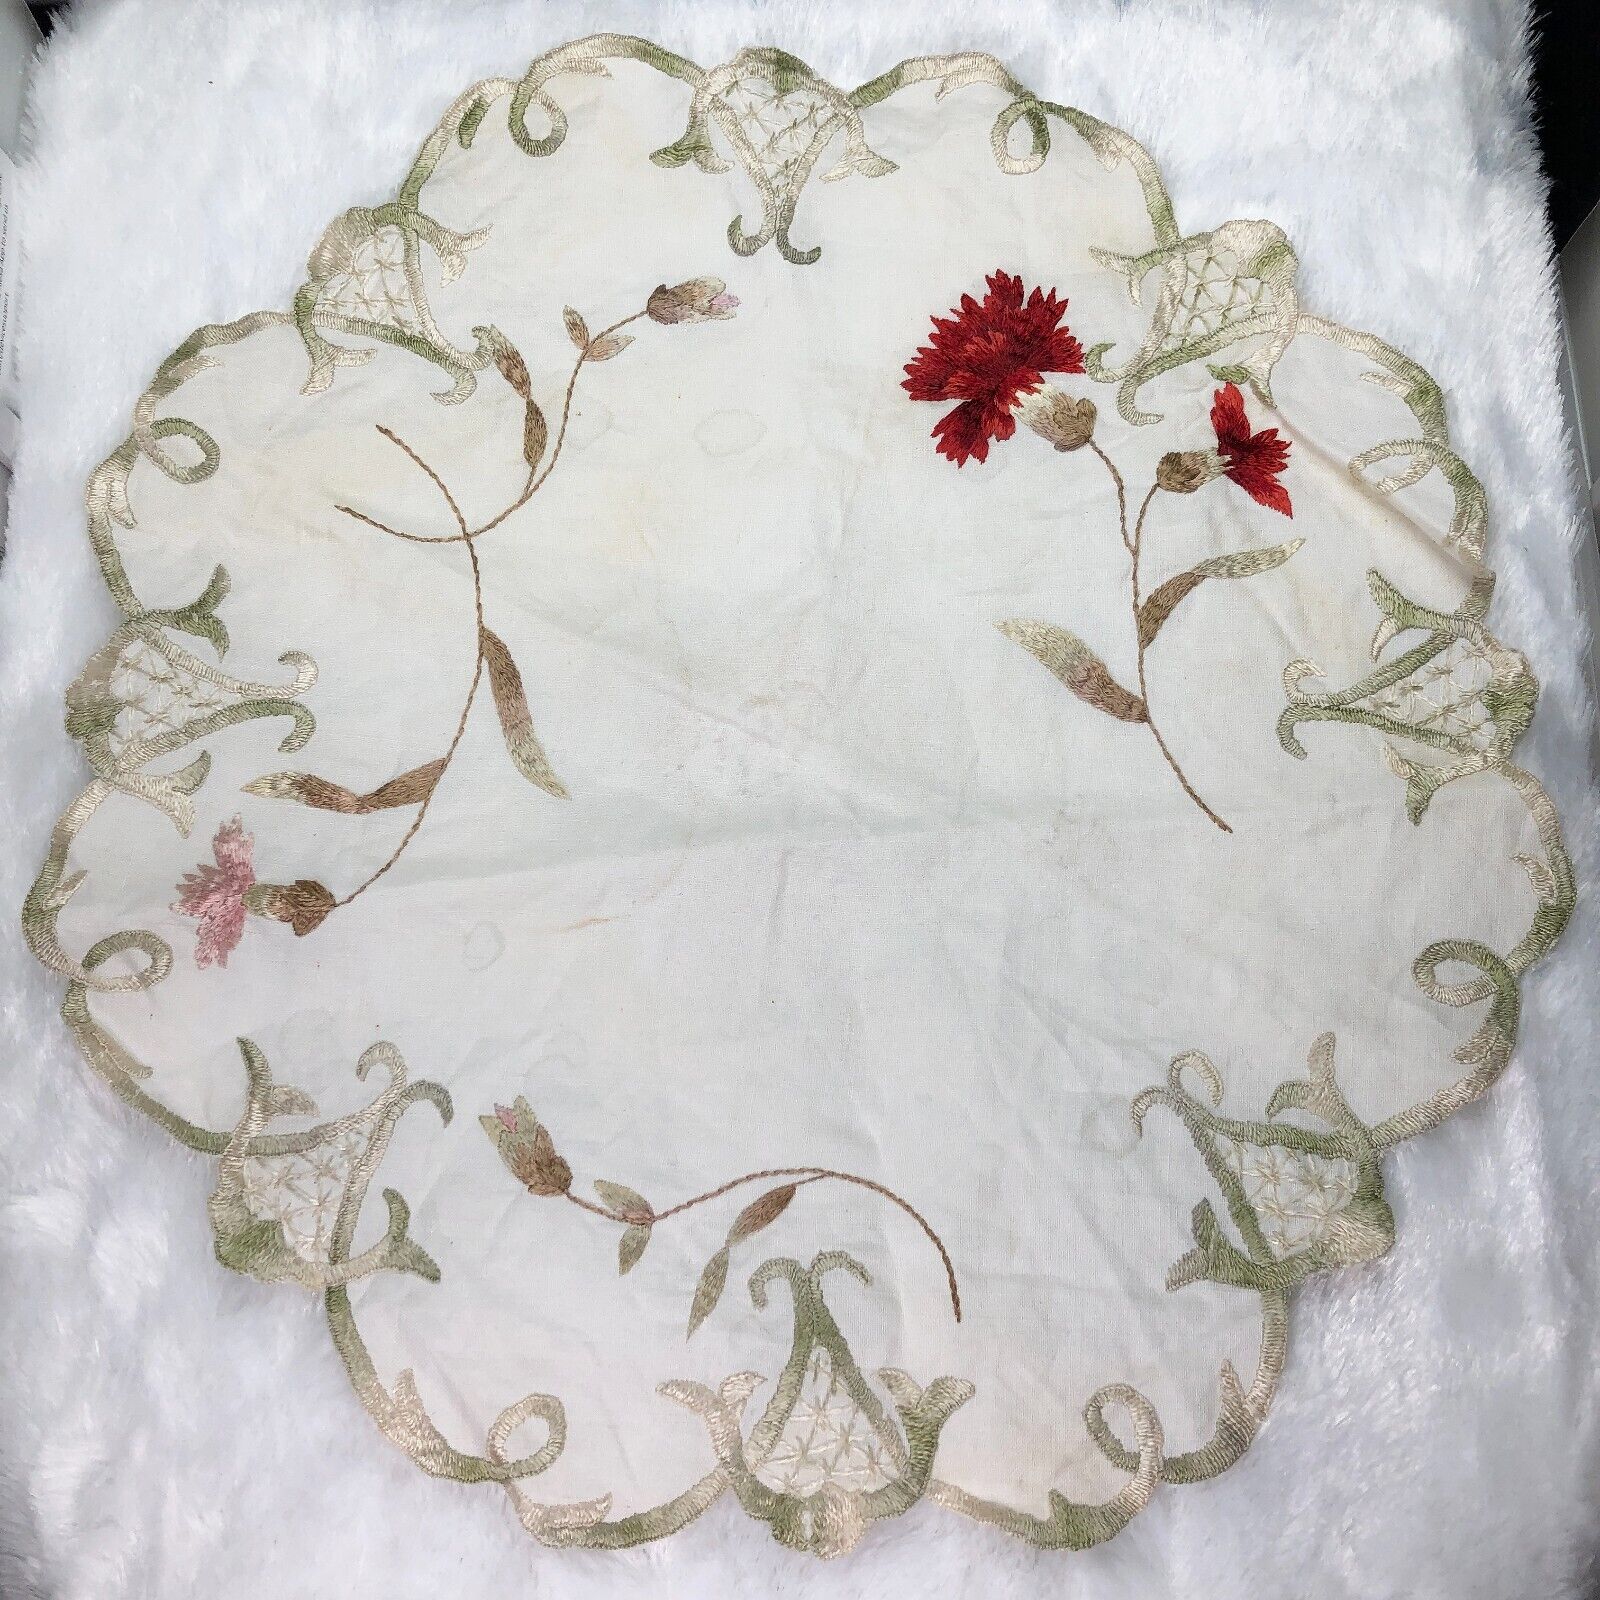 Antique Society Silk Embroidered Scalloped Edge Carnation Flowers Floral Doily